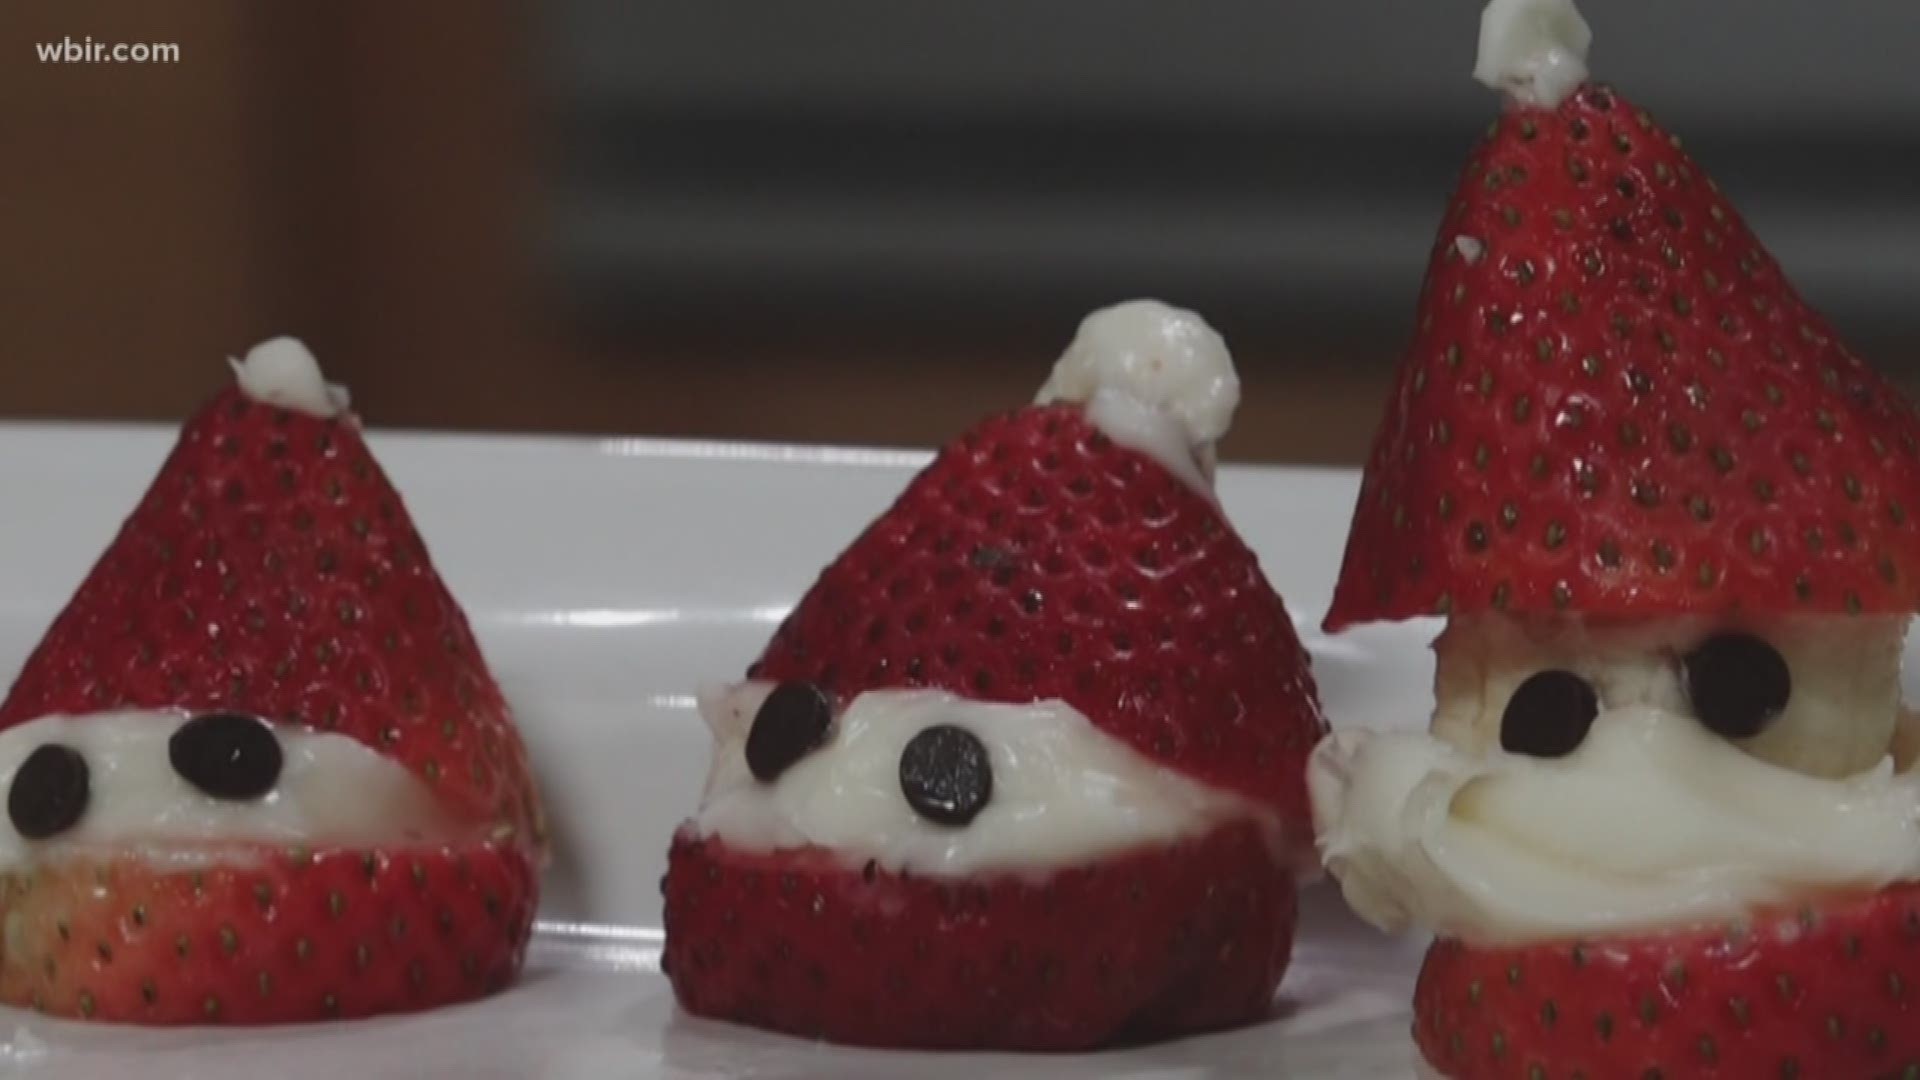 We are 166 days away from the big day and there are some fun ways to get you in the holiday spirit during the summer. WBIR 10News Reporter Leslie Ackerson is whipping up some sweet treats for us this morning to get us in the spirit.